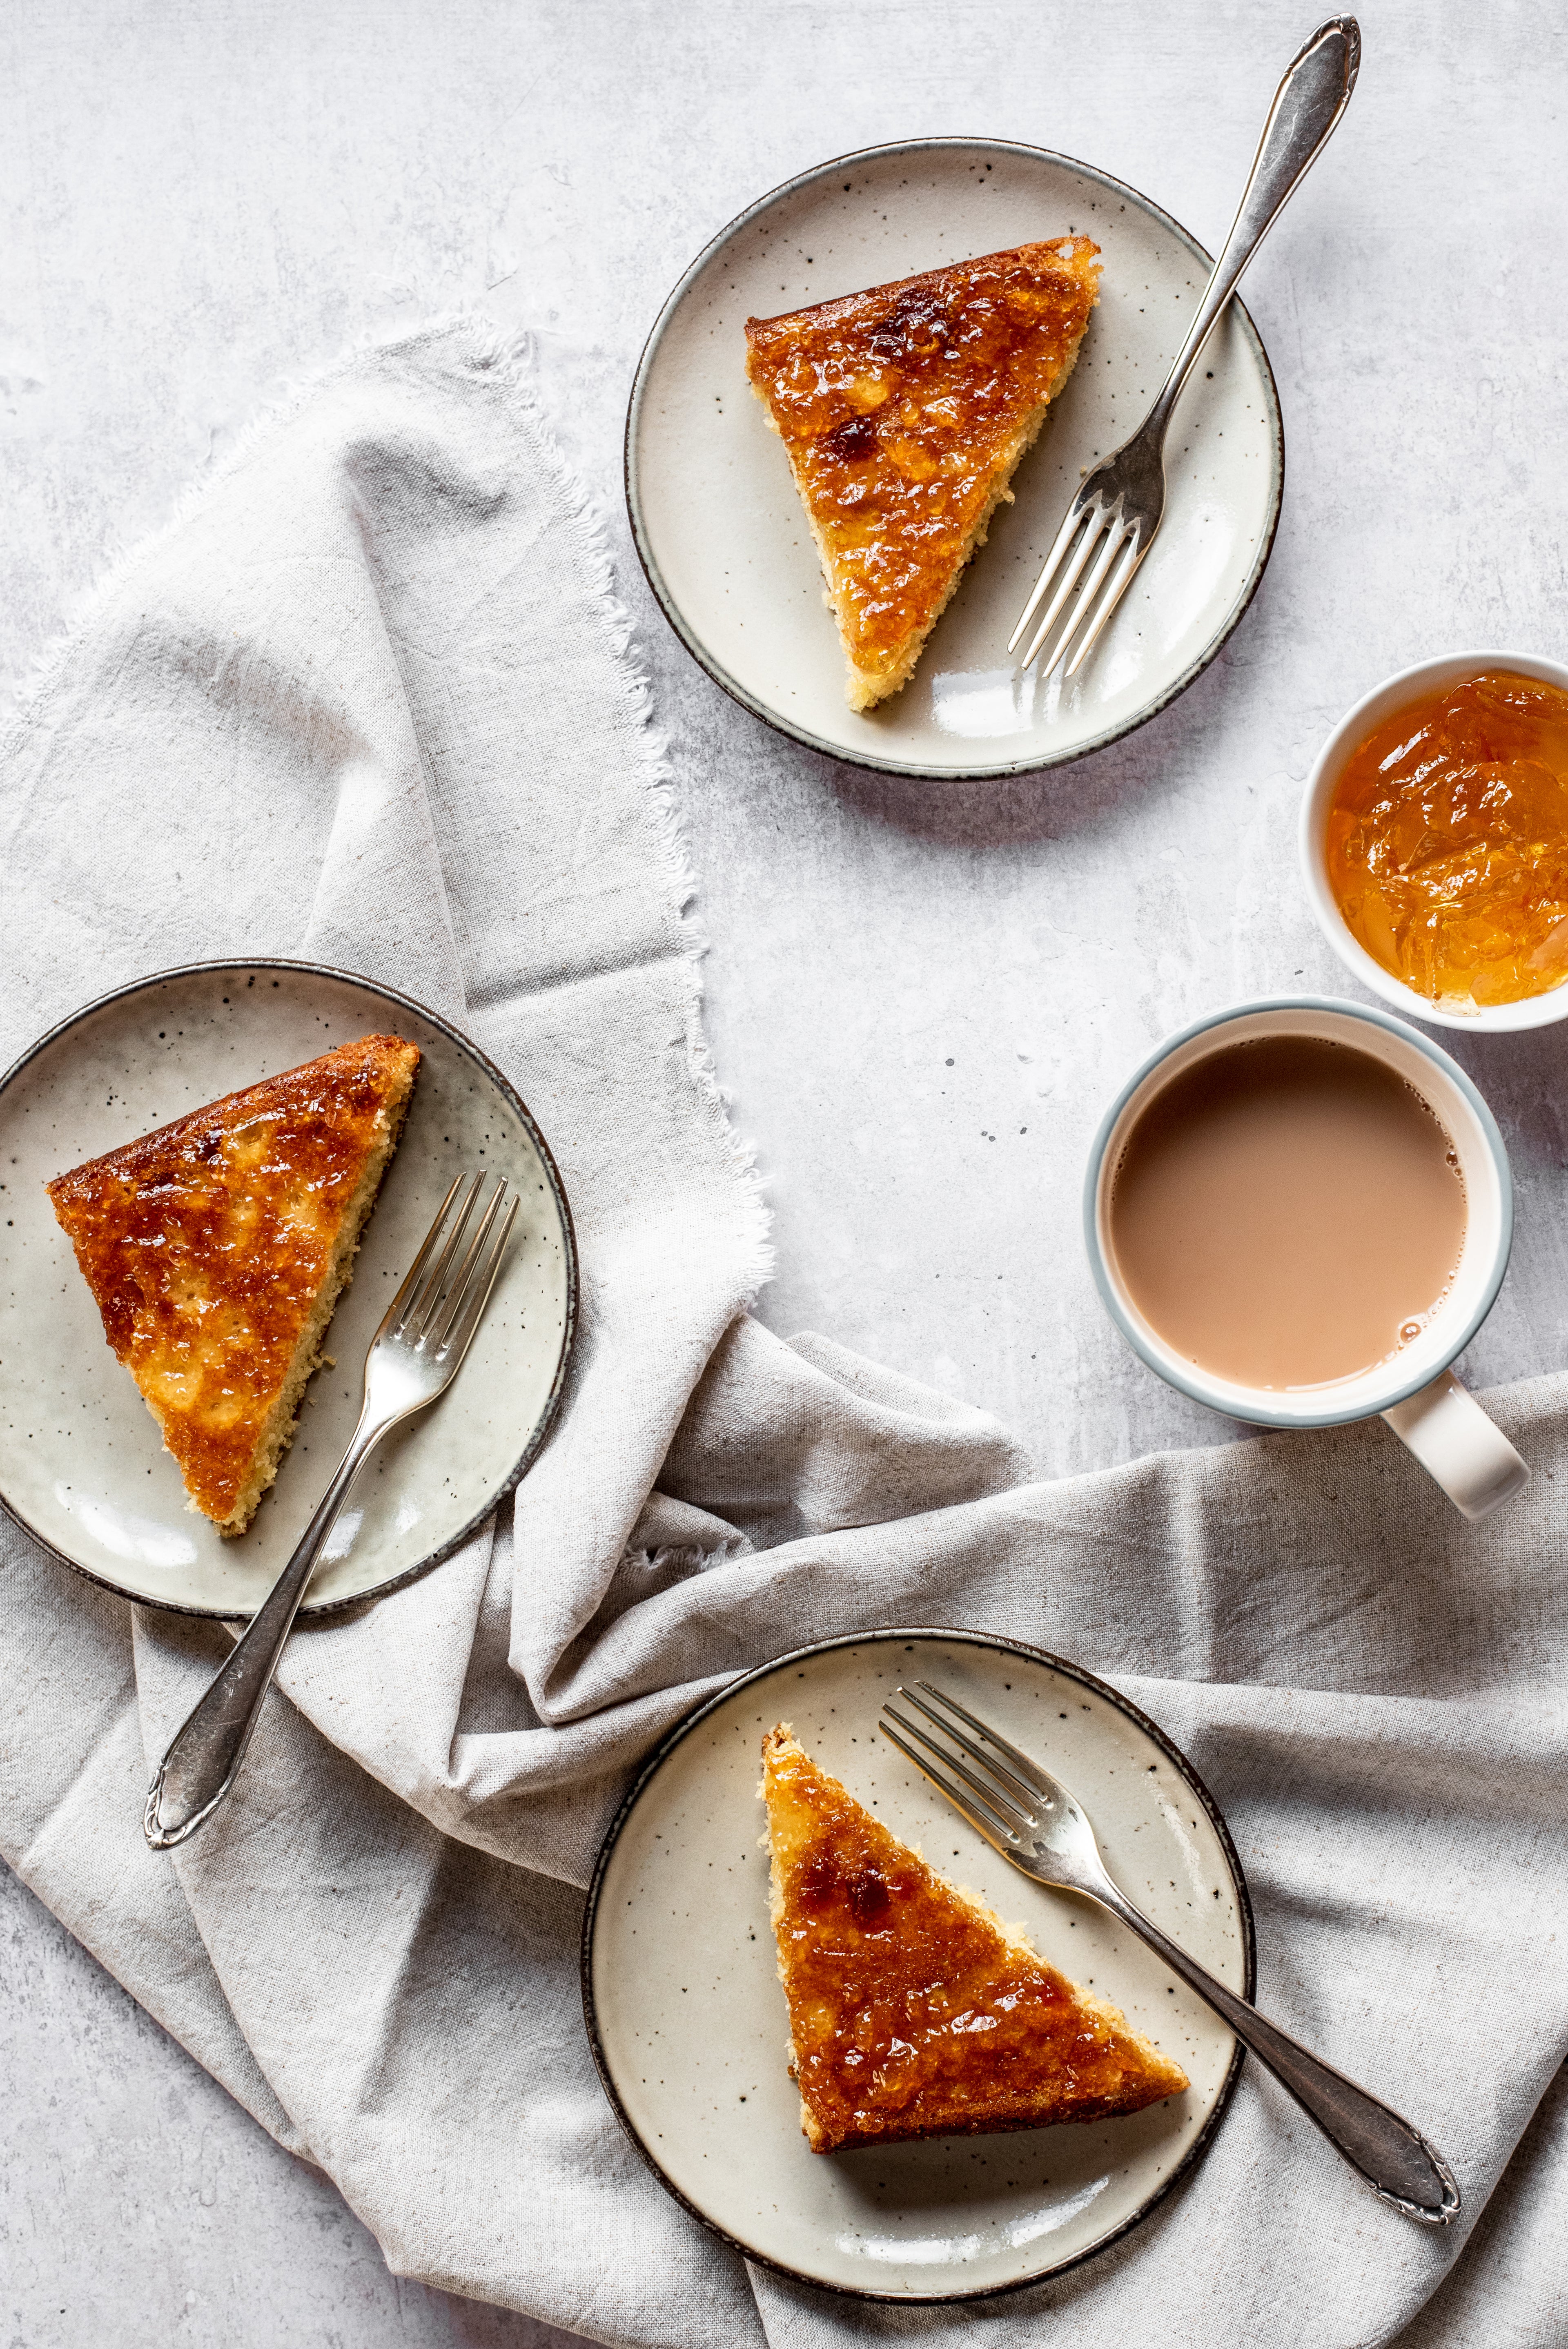 Flay lay of slices of Marmalade Traybake, on plates with forks, on top of linen next to a cup of tea and a bowl of marmalade